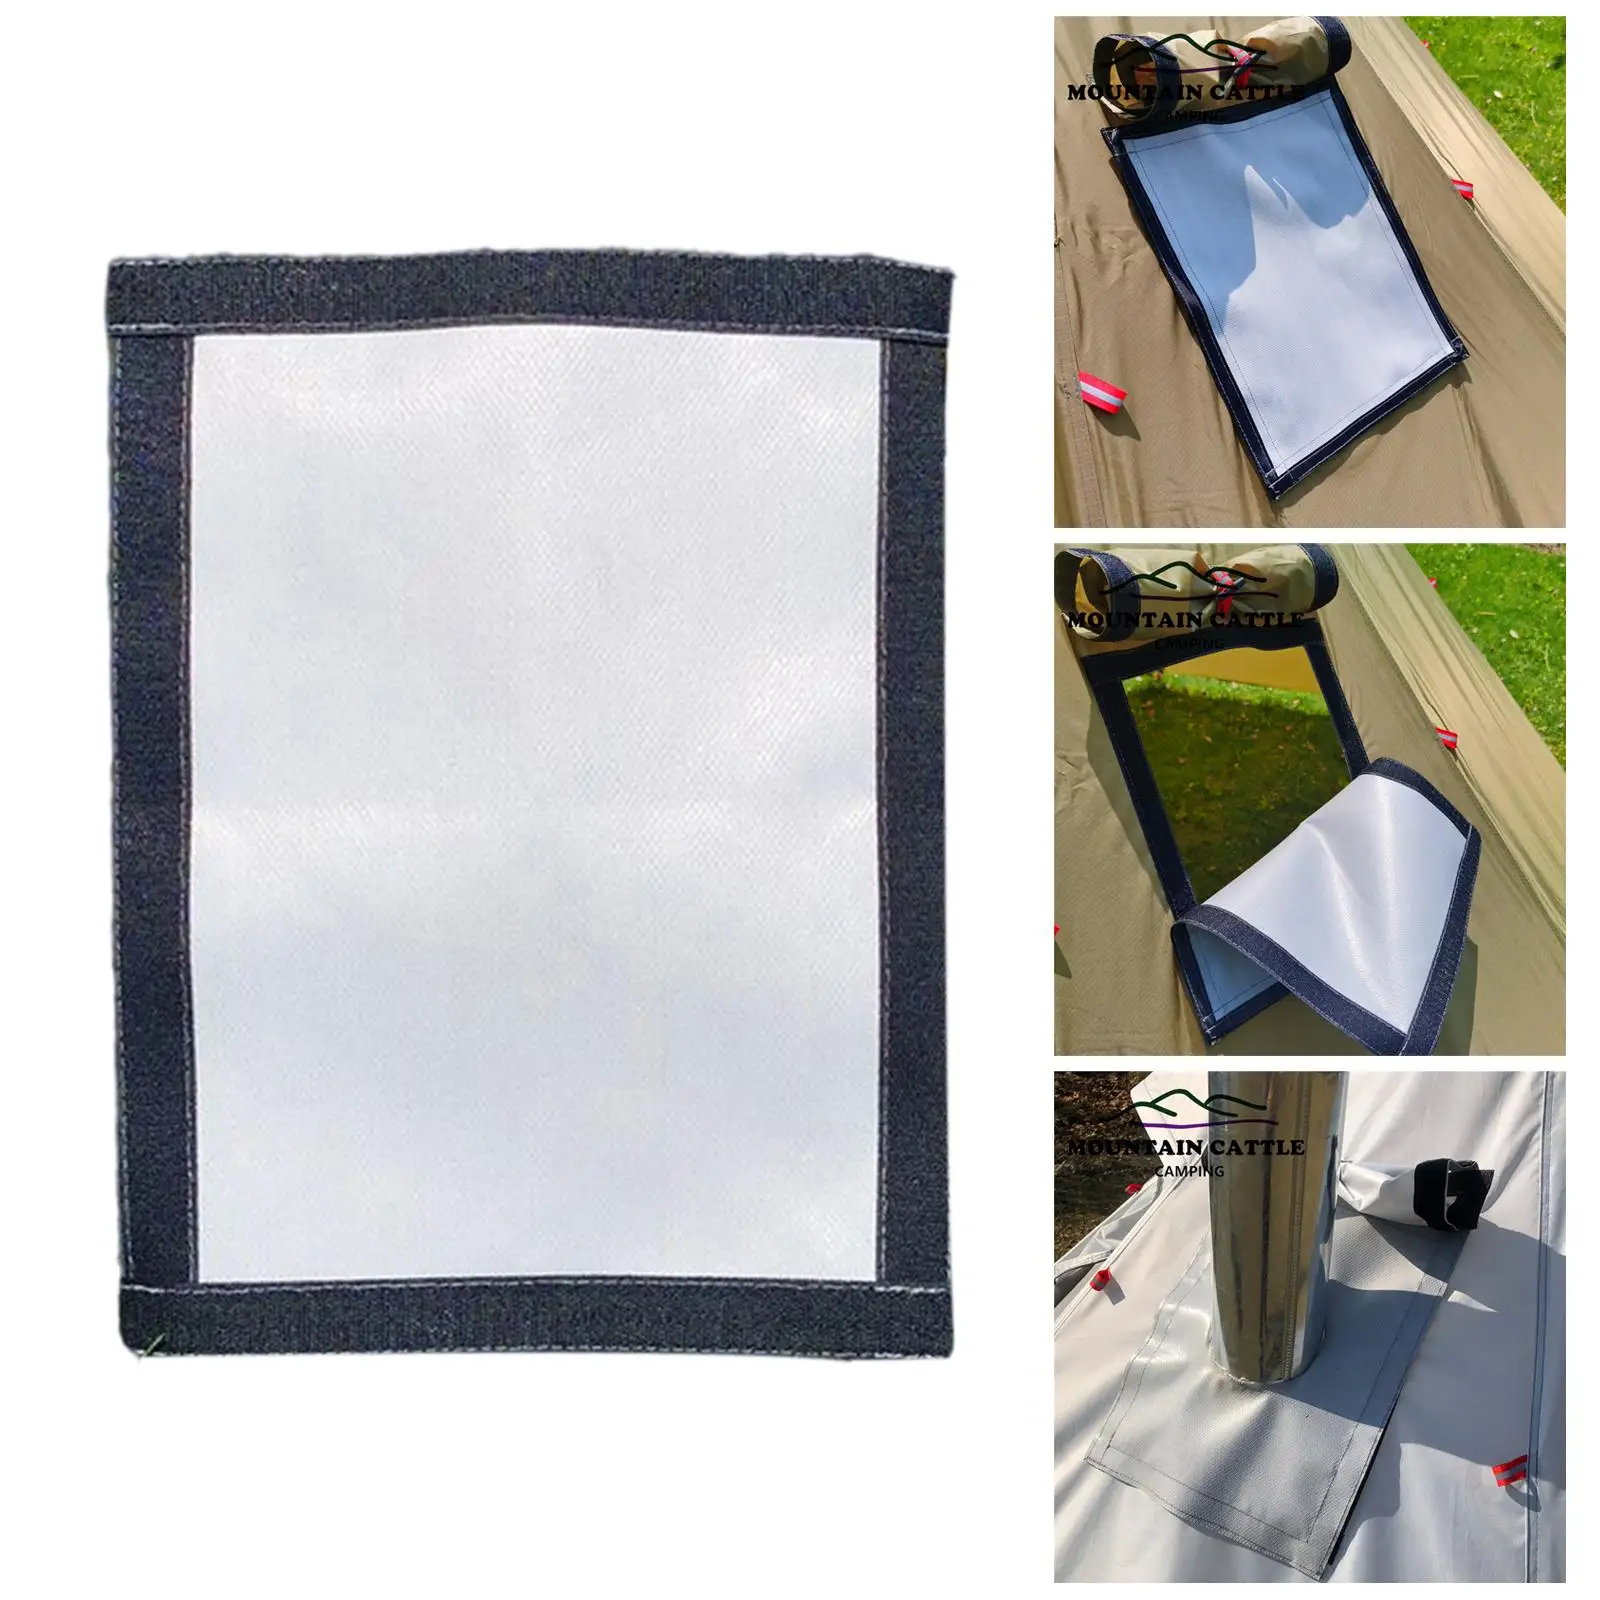 Tent Stove Fireproof Chimney Cloth Your Flue Heavy-Duty Hot Tent Stove Resistant Vent